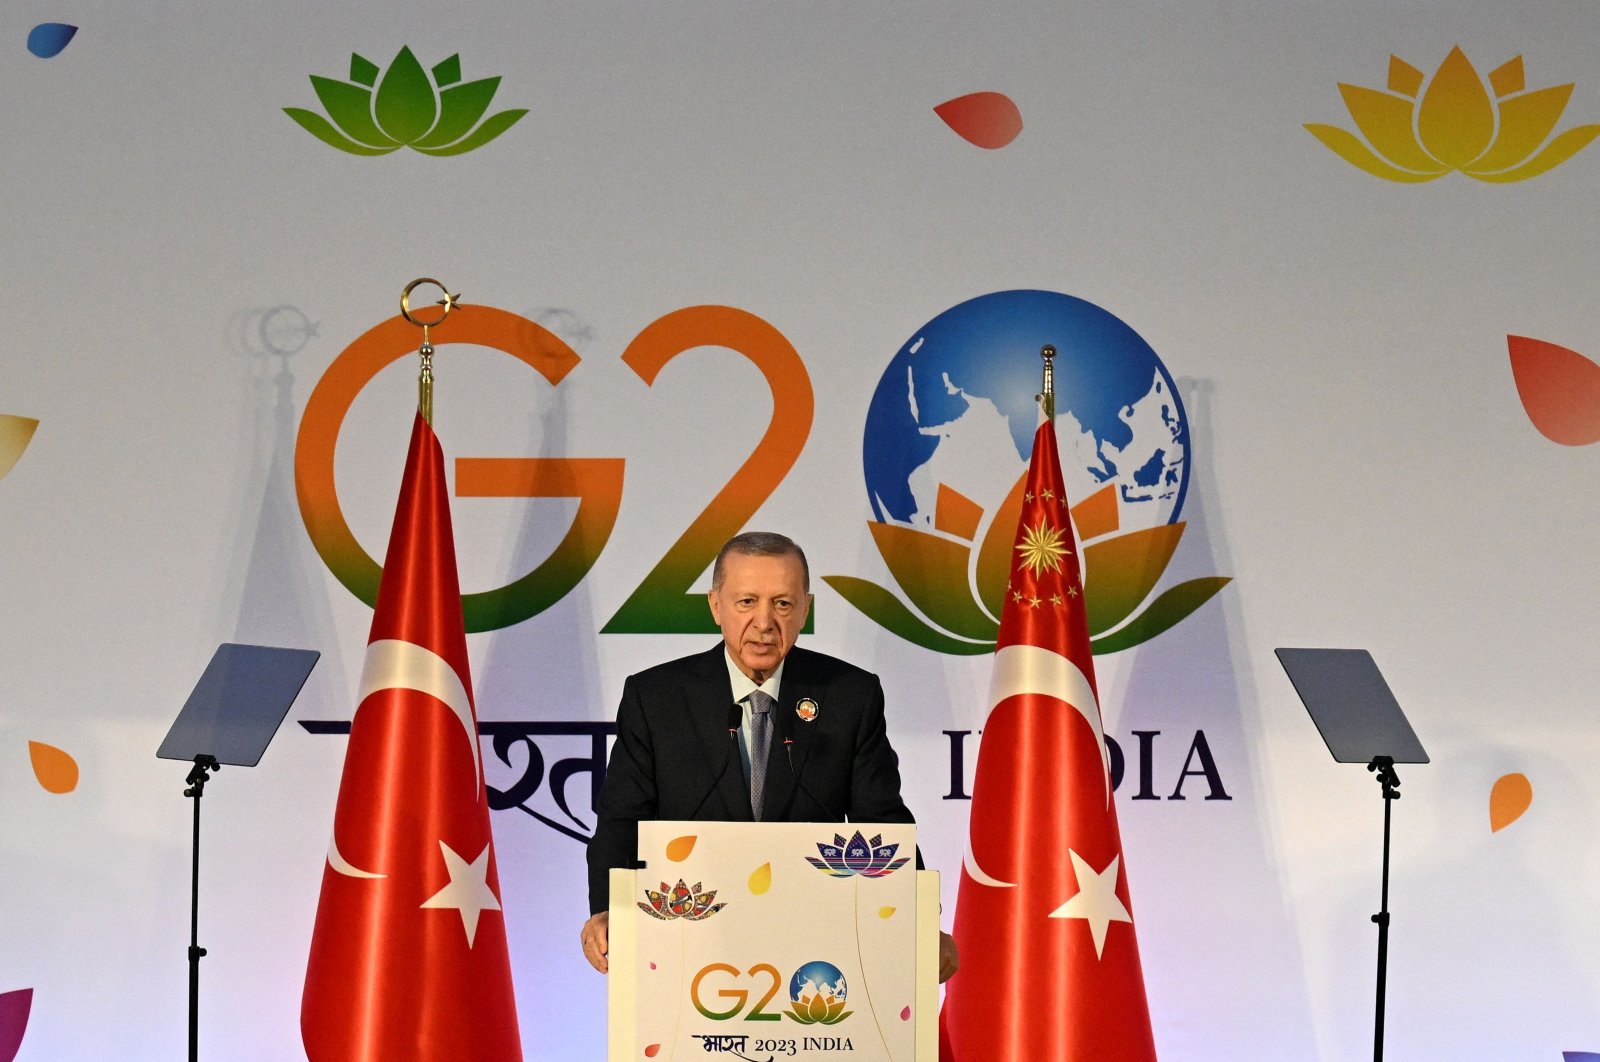 President Recep Tayyip Erdoğan speaks during a news conference after attending the G-20 summit, in New Delhi, India, Sept. 10, 2023. (AFP Photo)